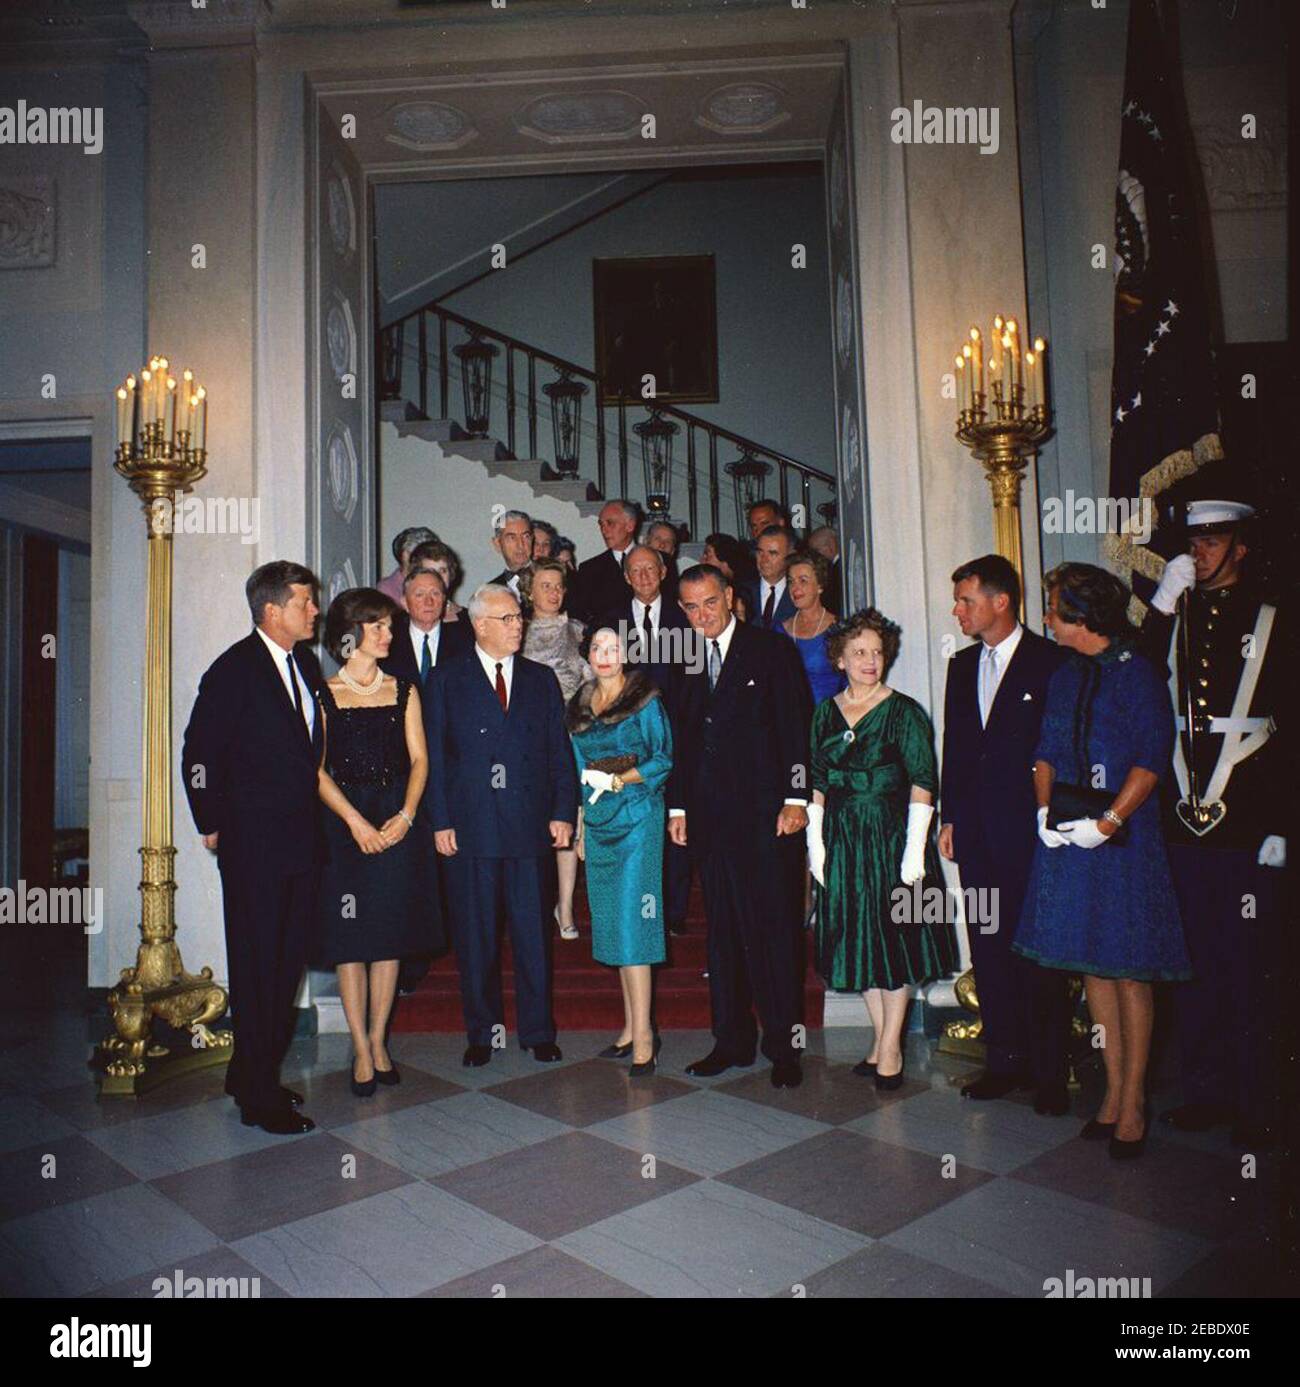 Judicial Reception, 6:00PM. White House reception for Judicial Branch. Front row (L u2013 R): President John F. Kennedy; First Lady Jacqueline Kennedy; Chief Justice Earl Warren; Lady Bird Johnson; Vice President Lyndon Johnson; Nina Warren, wife of Chief Justice Warren; Attorney General Robert F. Kennedy; Ethel Kennedy; unidentified color guard officer. Second row (L u2013 R): Supreme Court Associate Justice William O. Douglas; Mercedes Douglas, wife of Justice Douglas; Supreme Court Associate Justice Hugo Black. Other guests unidentified. Grand Staircase, Entrance Hall, White House, Washin Stock Photo